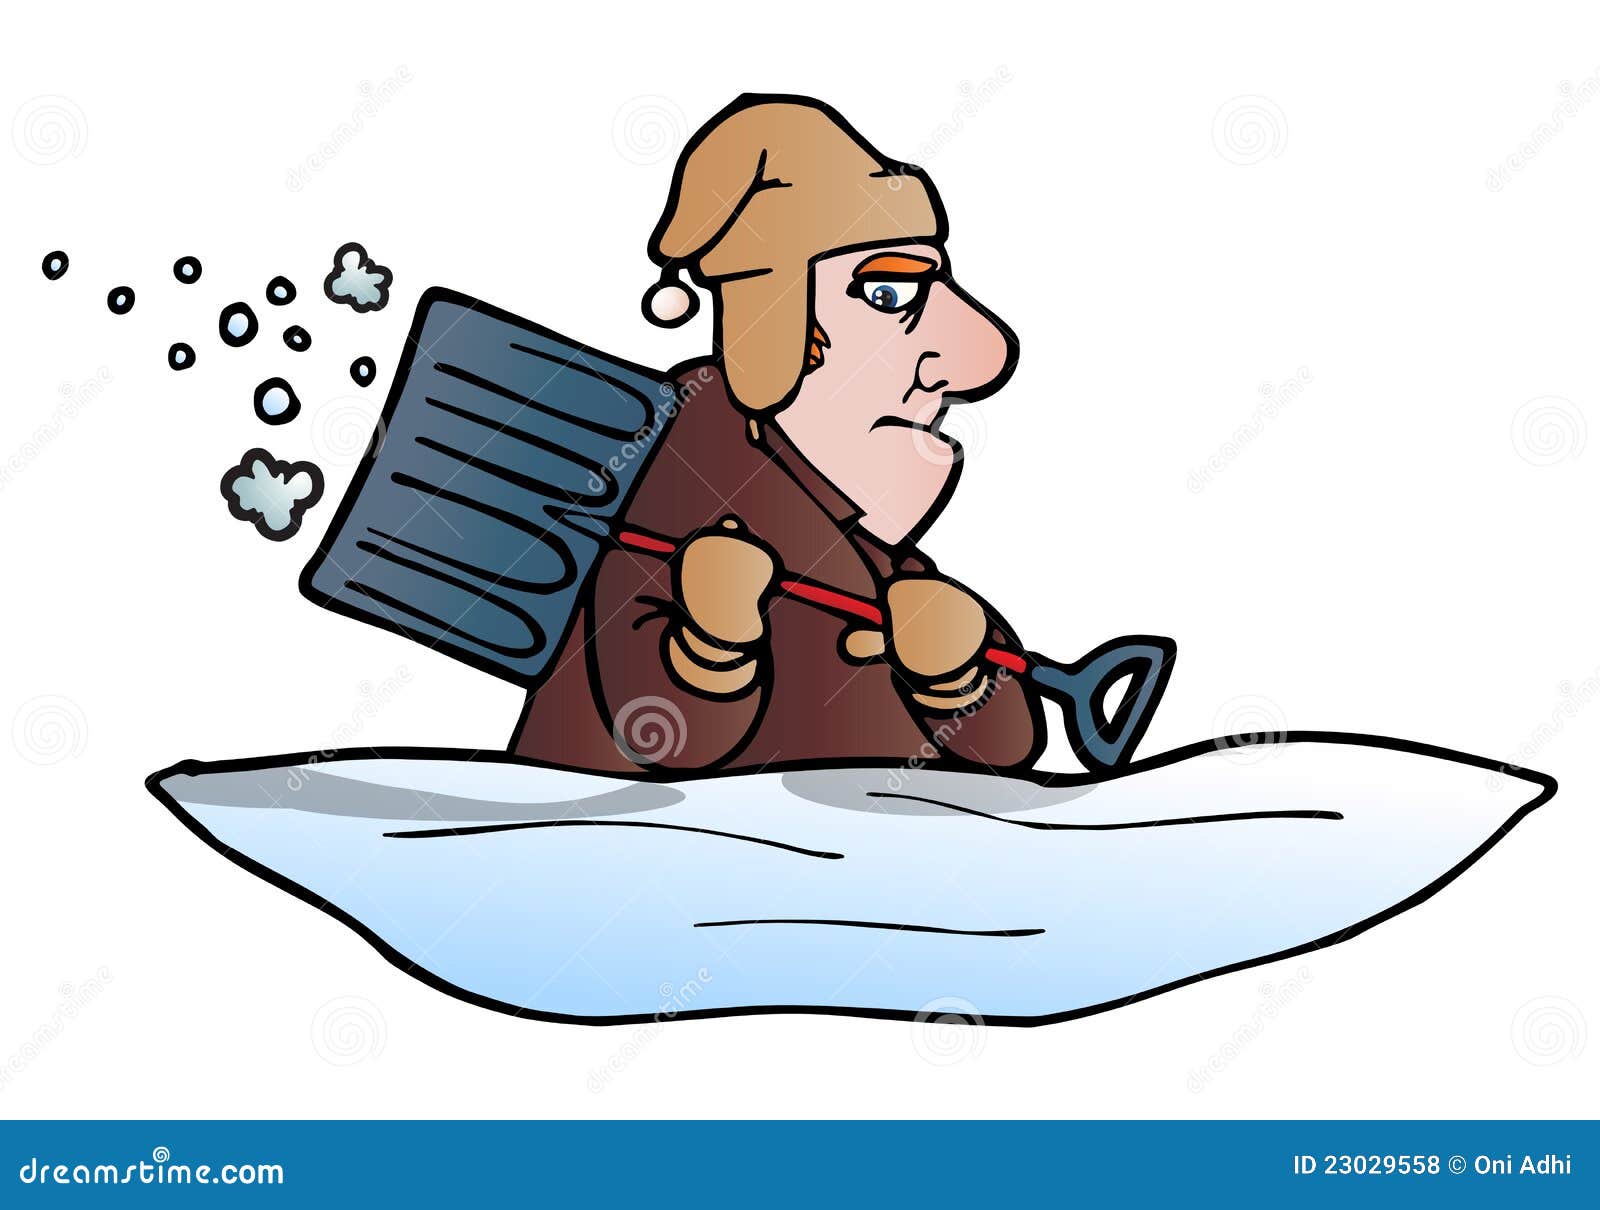 snow removal clipart - photo #28